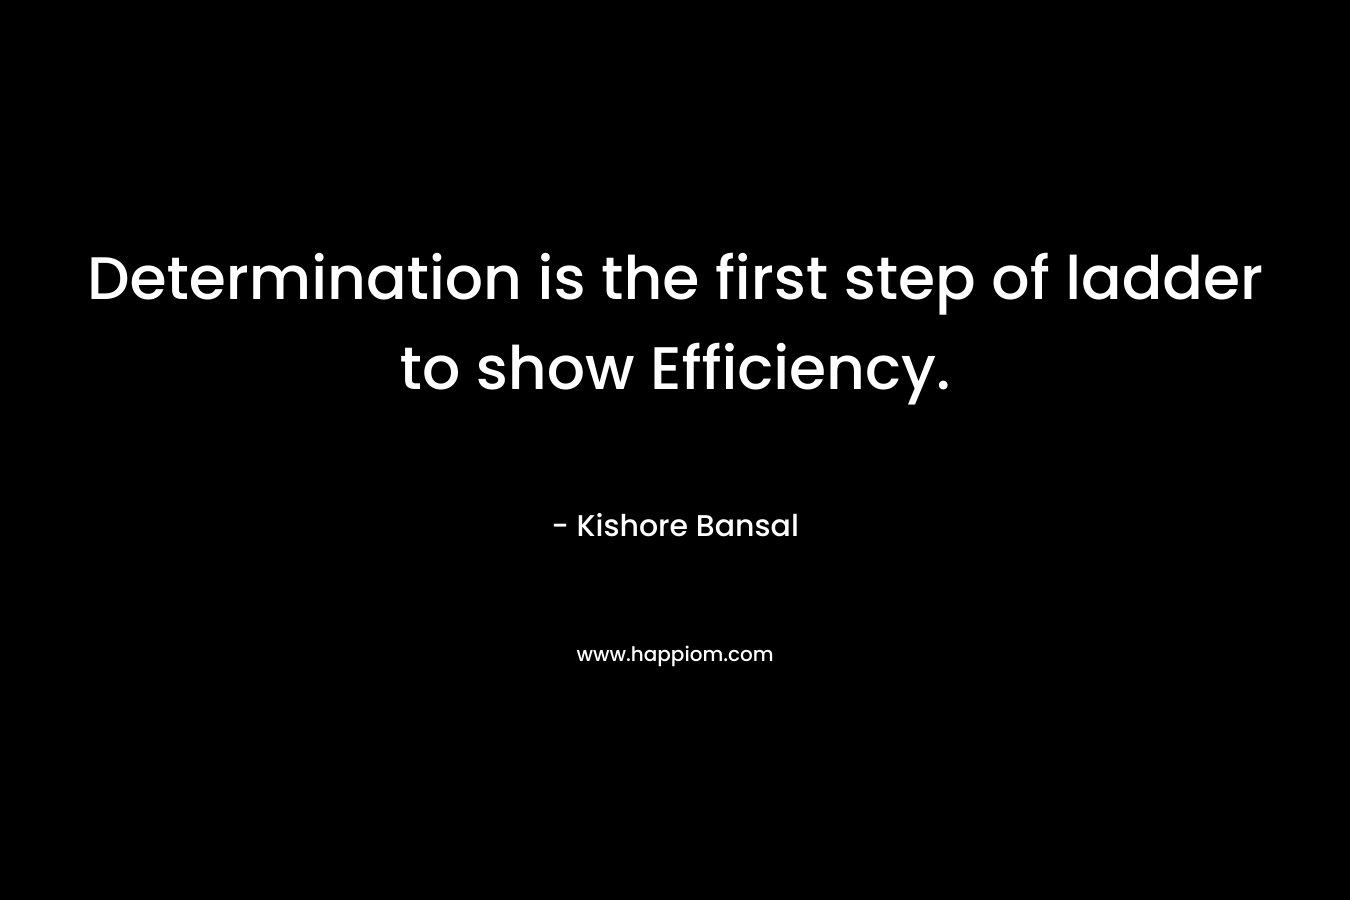 Determination is the first step of ladder to show Efficiency. – Kishore Bansal